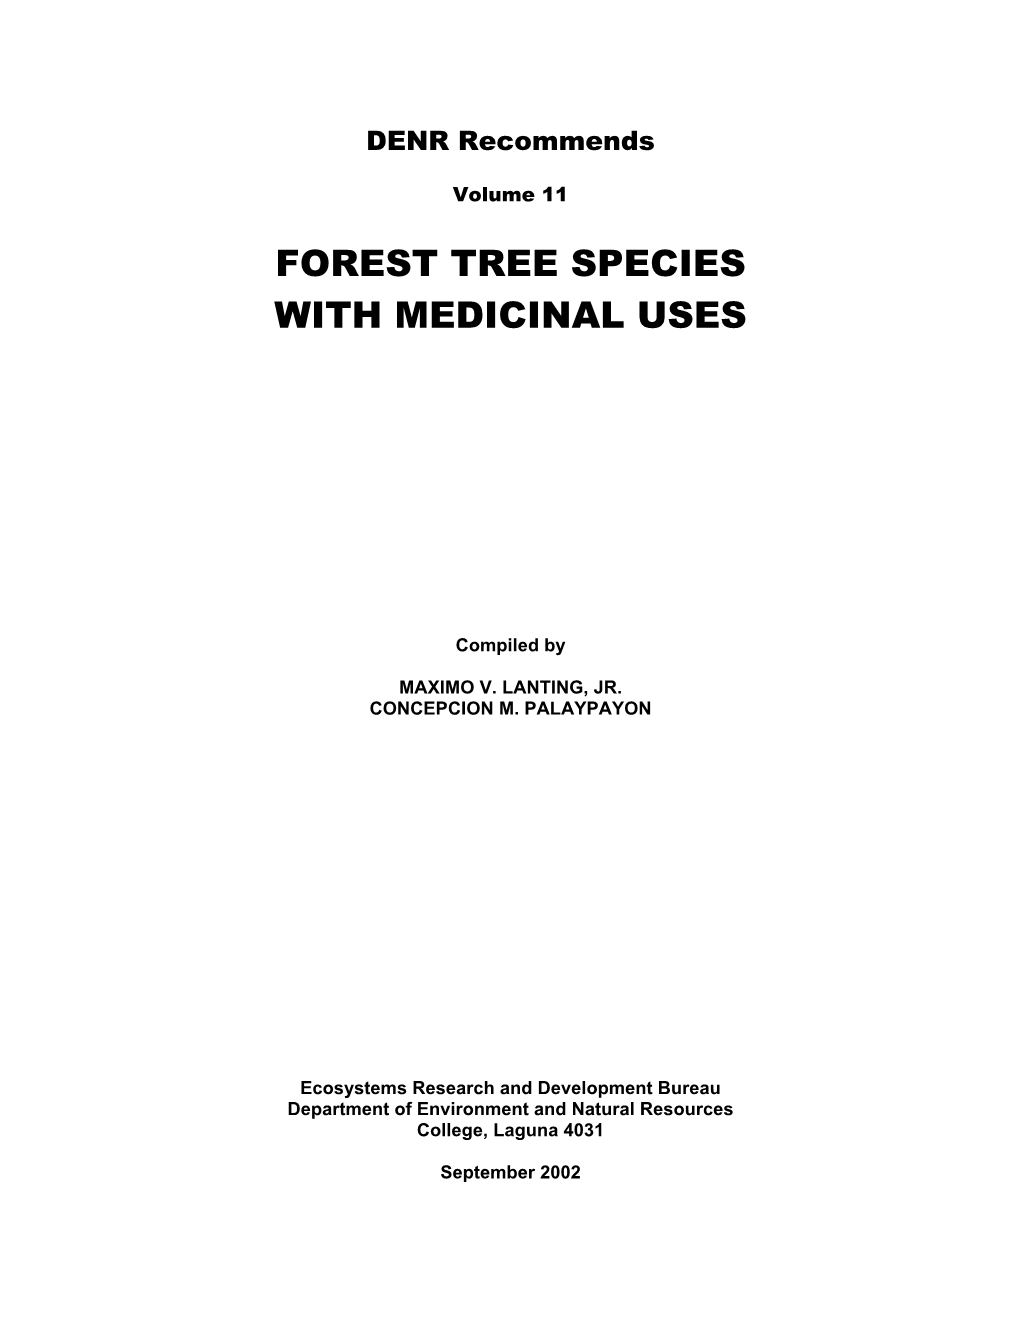 Forest Tree Species with Medicinal Uses